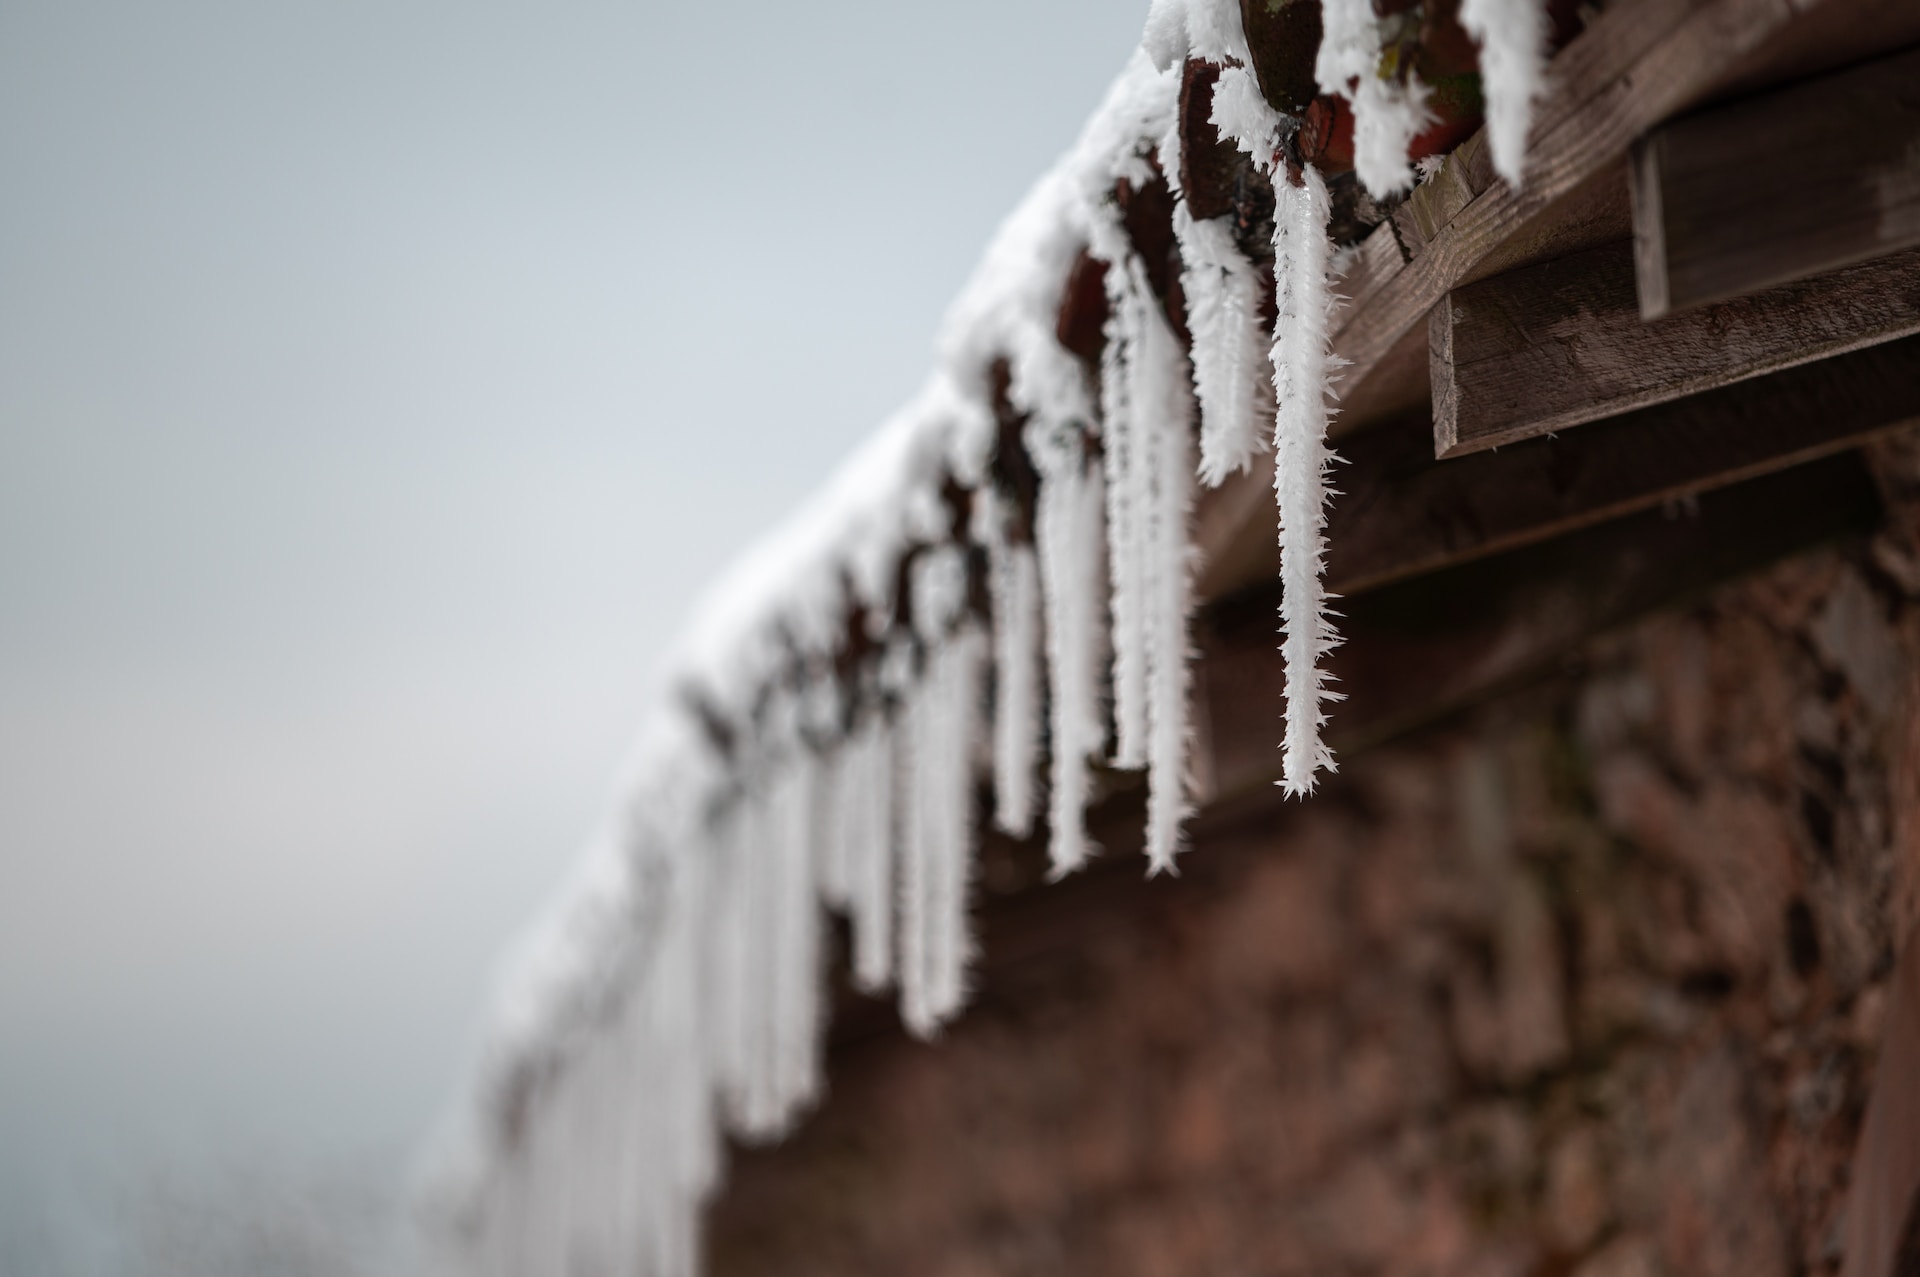 Icicles forming on the edge of a roof